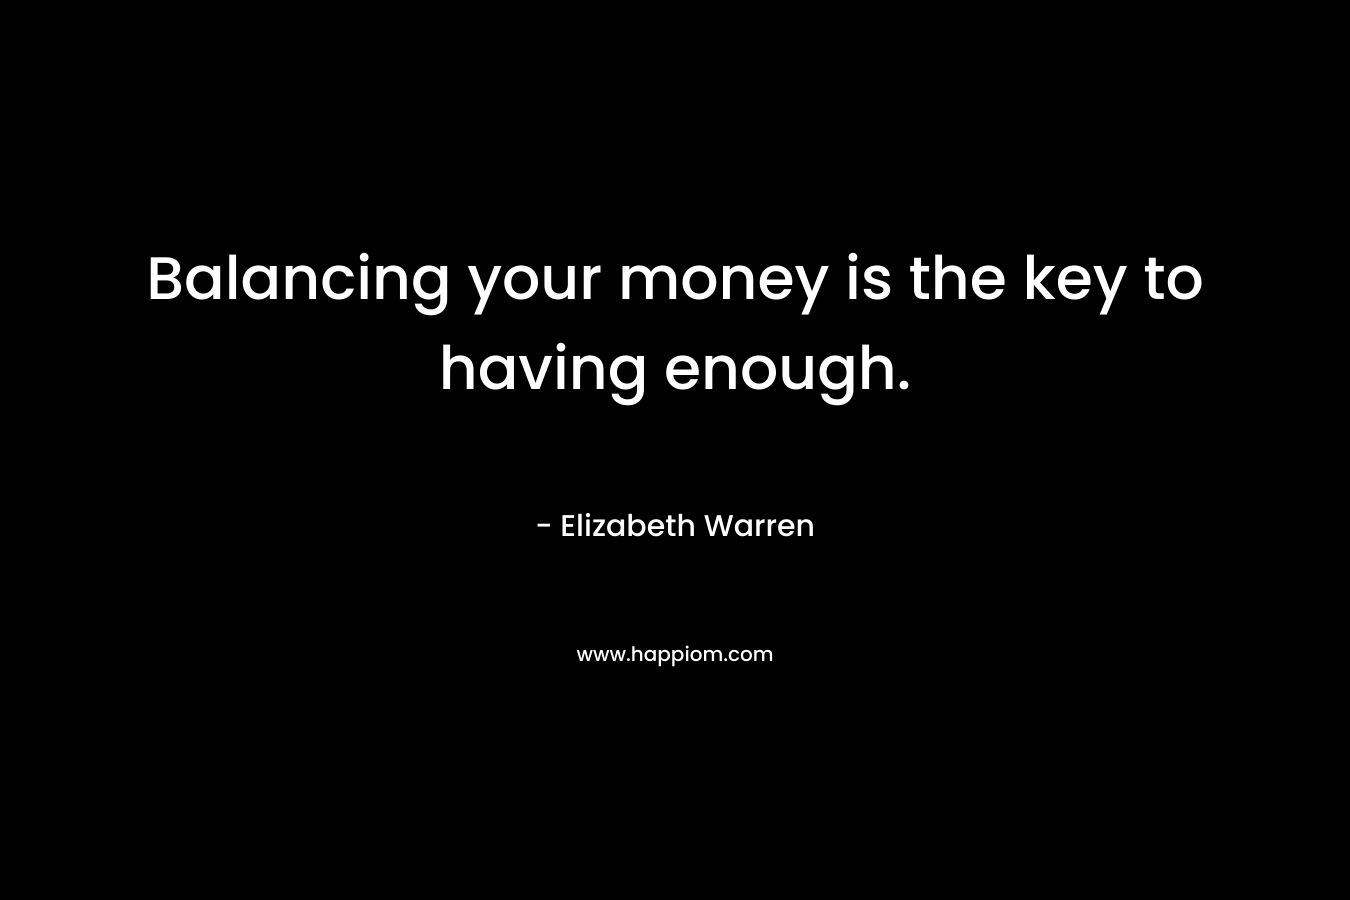 Balancing your money is the key to having enough.